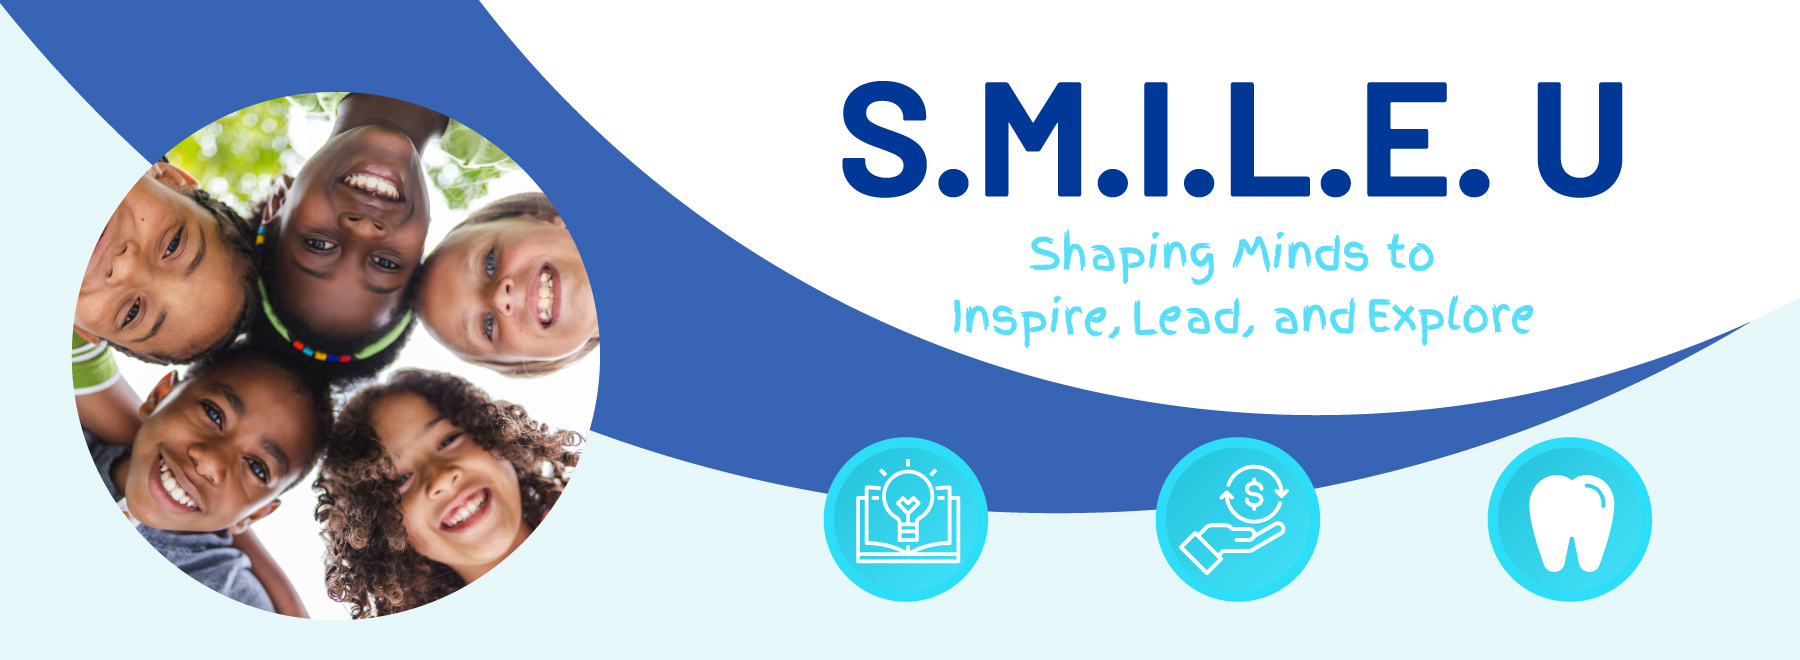 Circle inset of five smiling children standing in a circle from above. Text to right reads SMILE U: Shaping Minds to Inspire, Lead, and Explore. Row of three icons within a circle include a light bulb in front of an open book, an open hand under a dollar sign within two semicircle arrows, and a tooth.